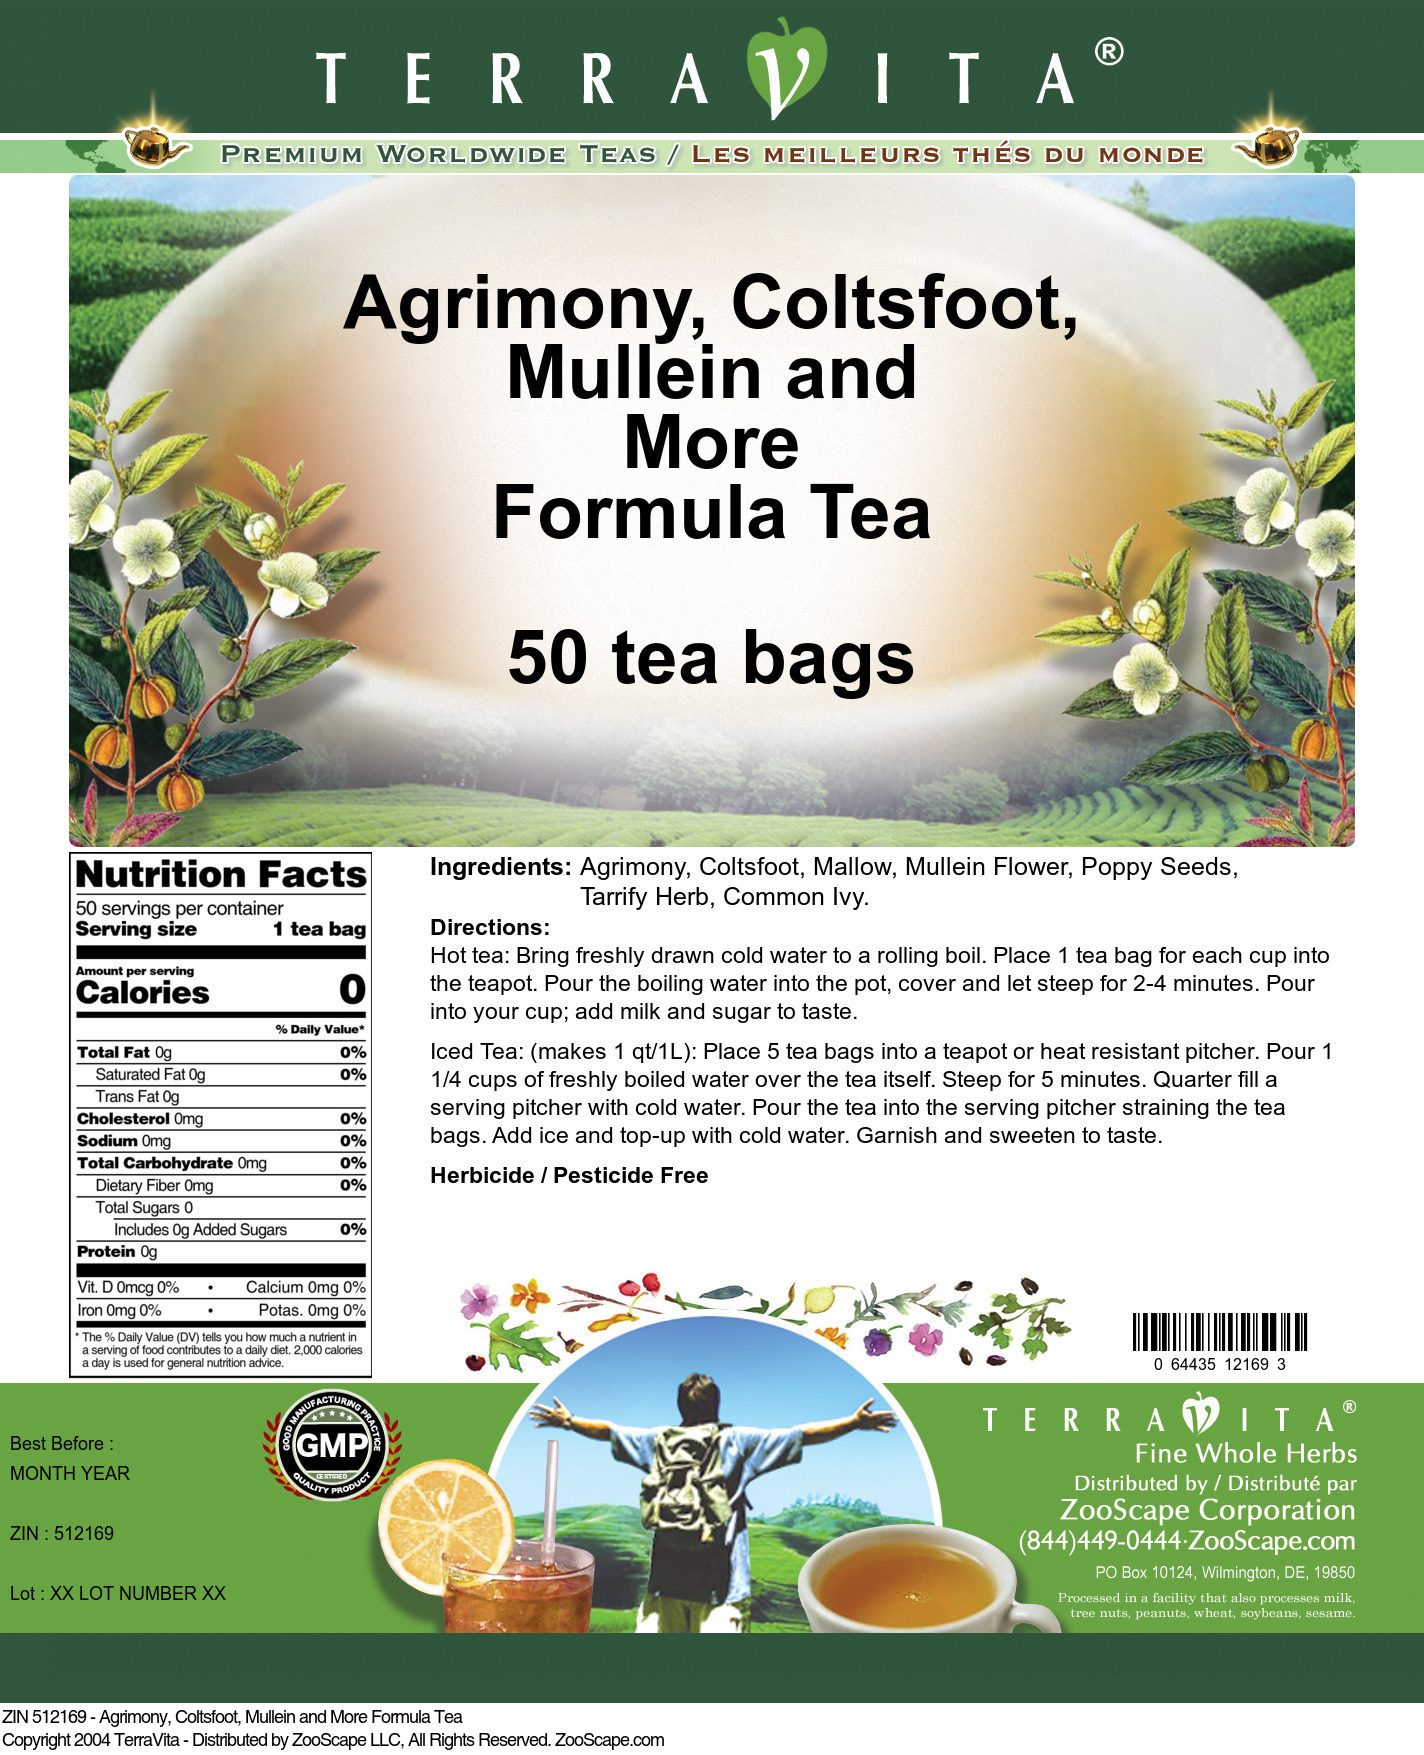 Agrimony, Coltsfoot, Mullein and More Formula Tea - Label